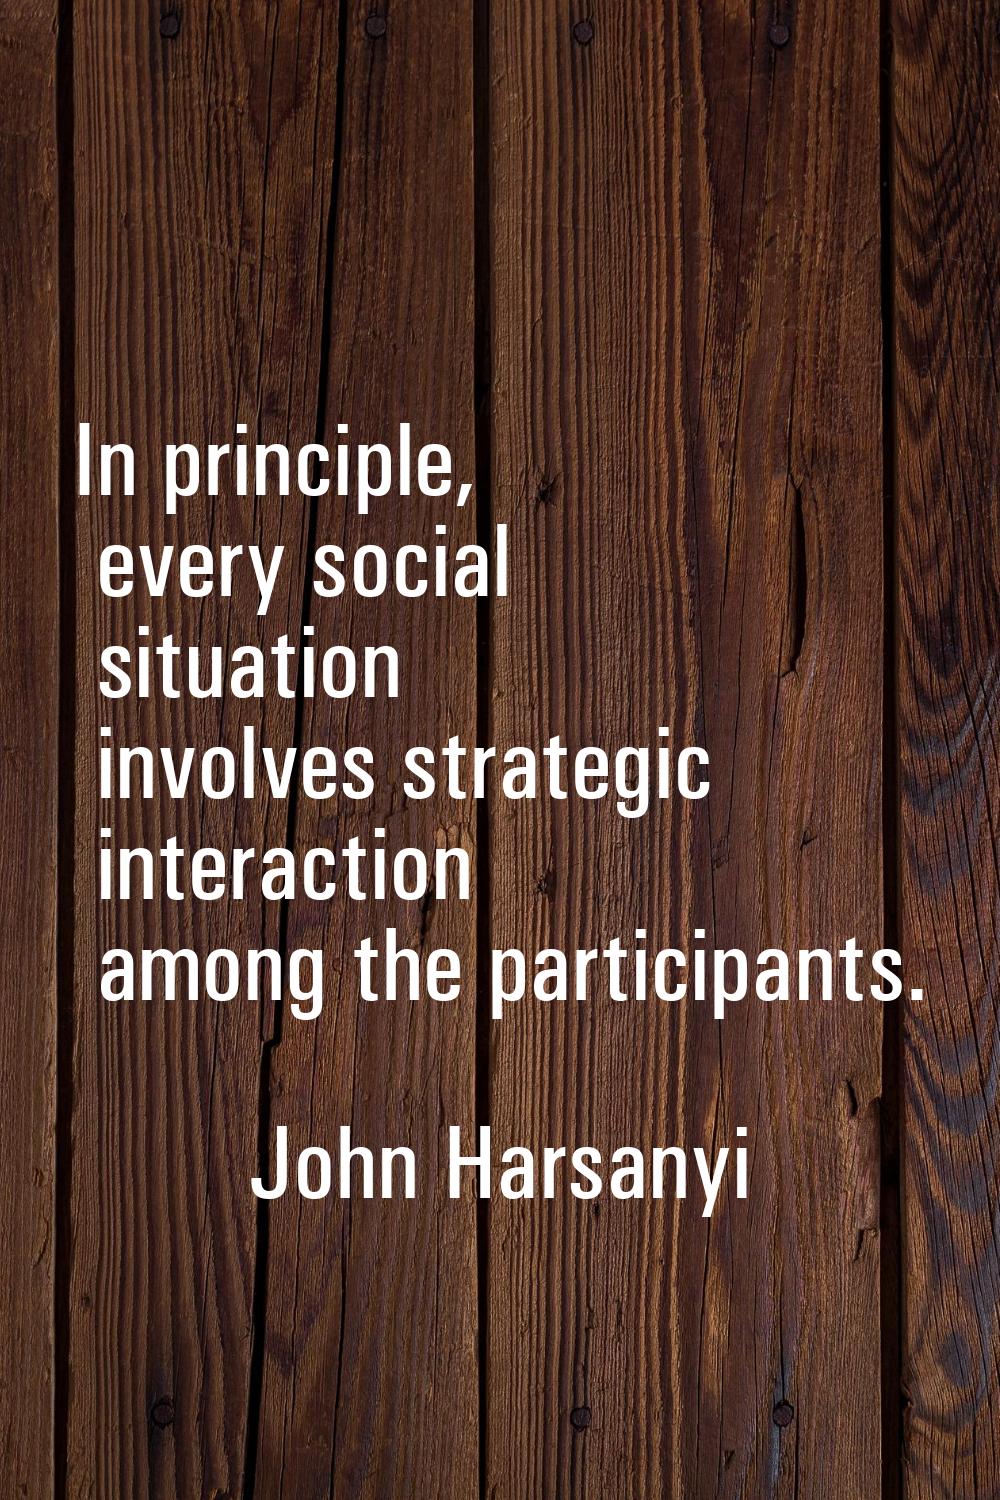 In principle, every social situation involves strategic interaction among the participants.